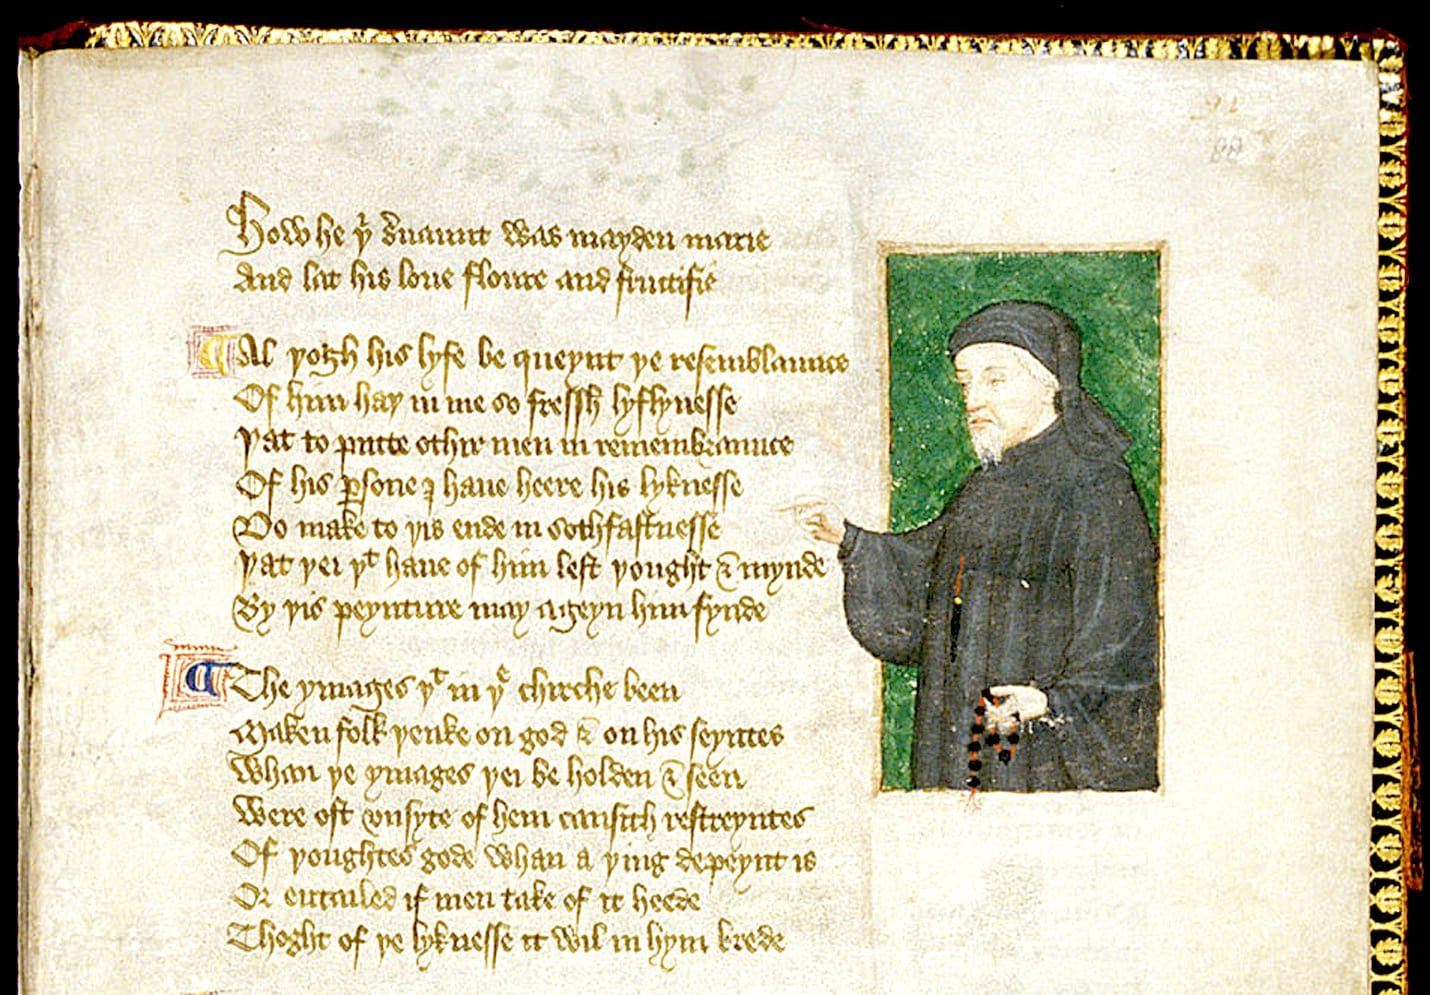 Portrait of Chaucer by Thomas Hoccleve in the Regiment of Princes (1412)